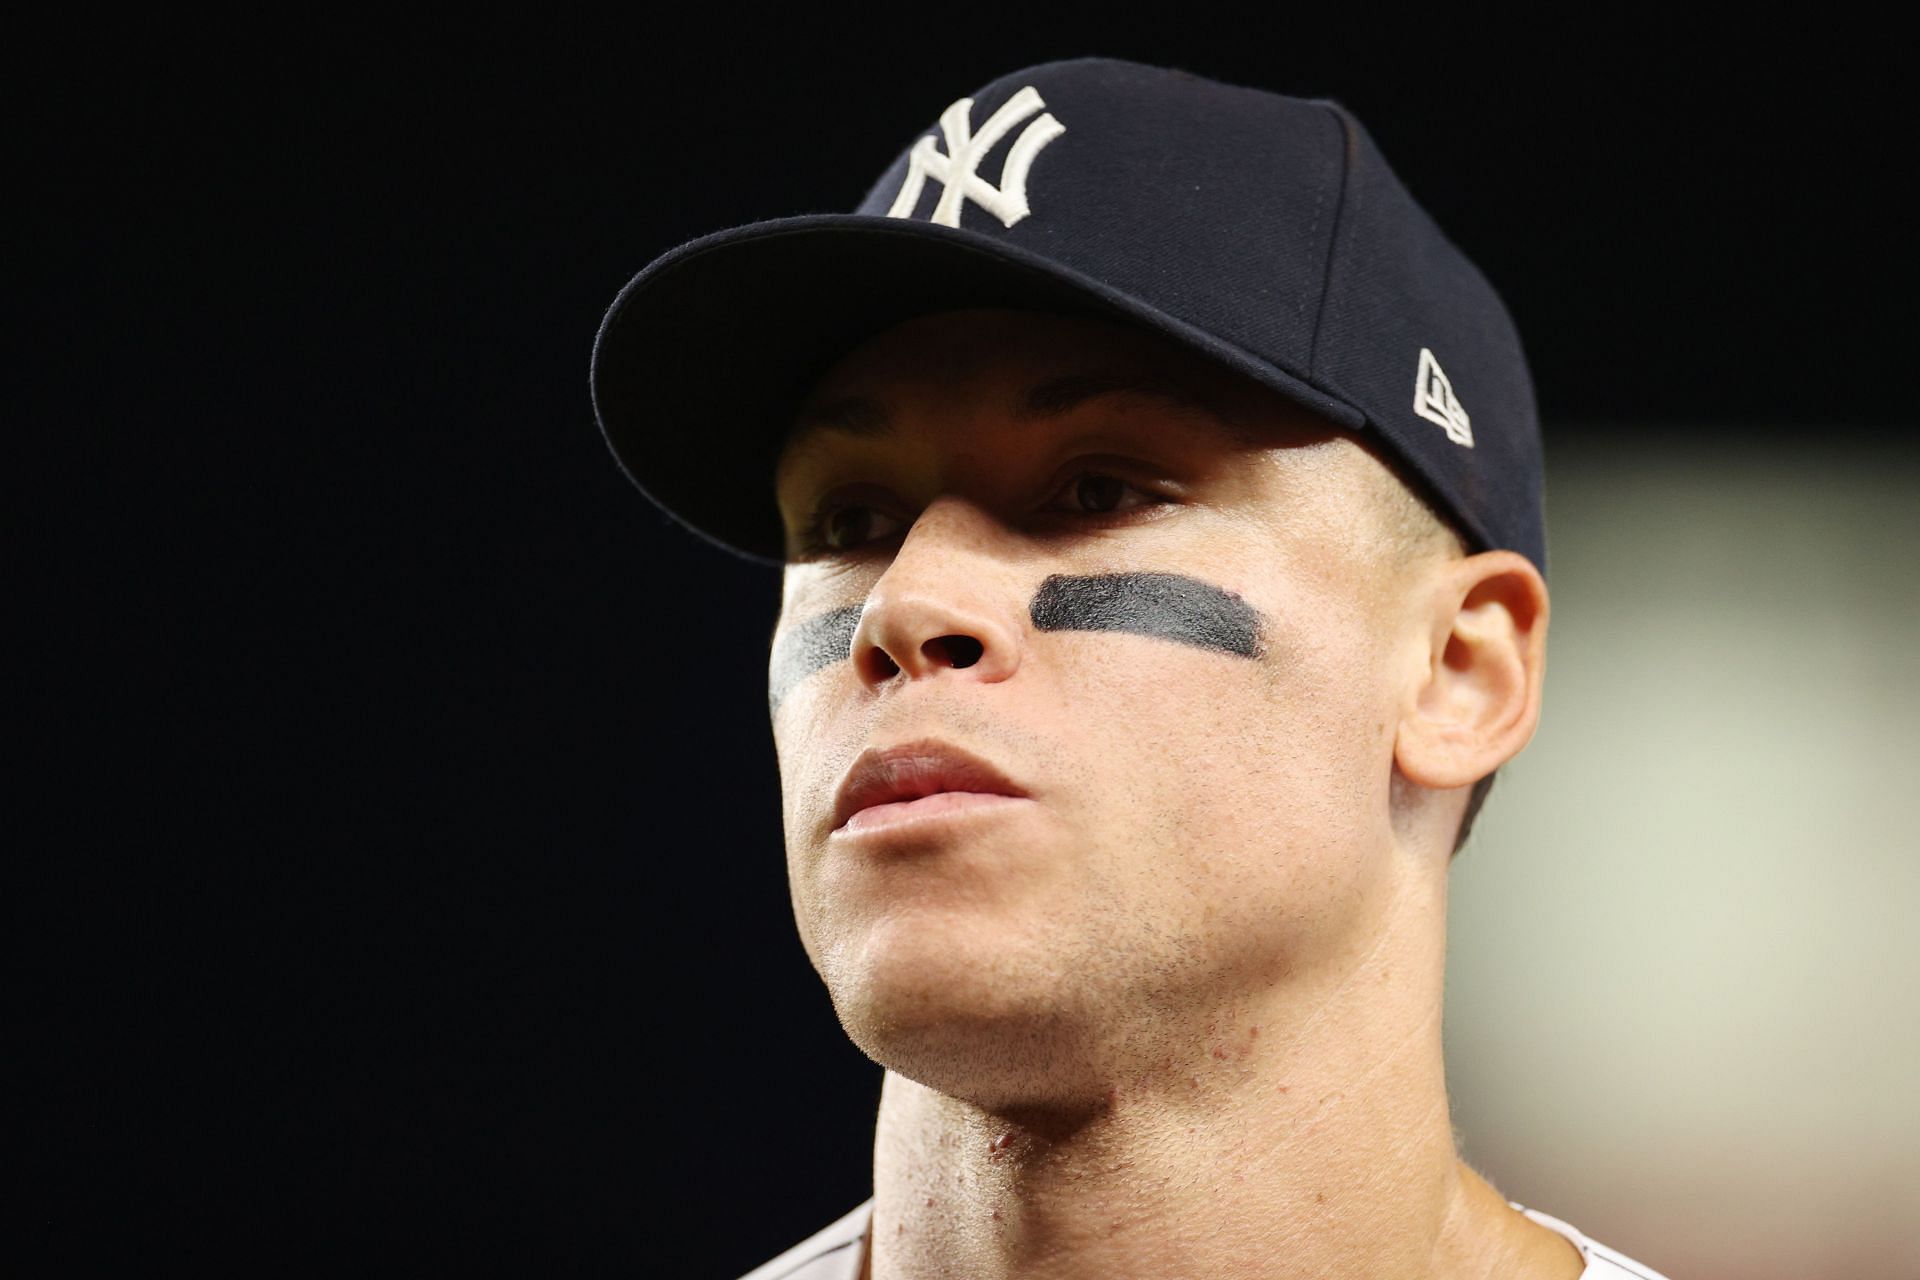 Aaron Judge looks on during the seventh inning against the Tampa Bay Rays at Yankee Stadium.